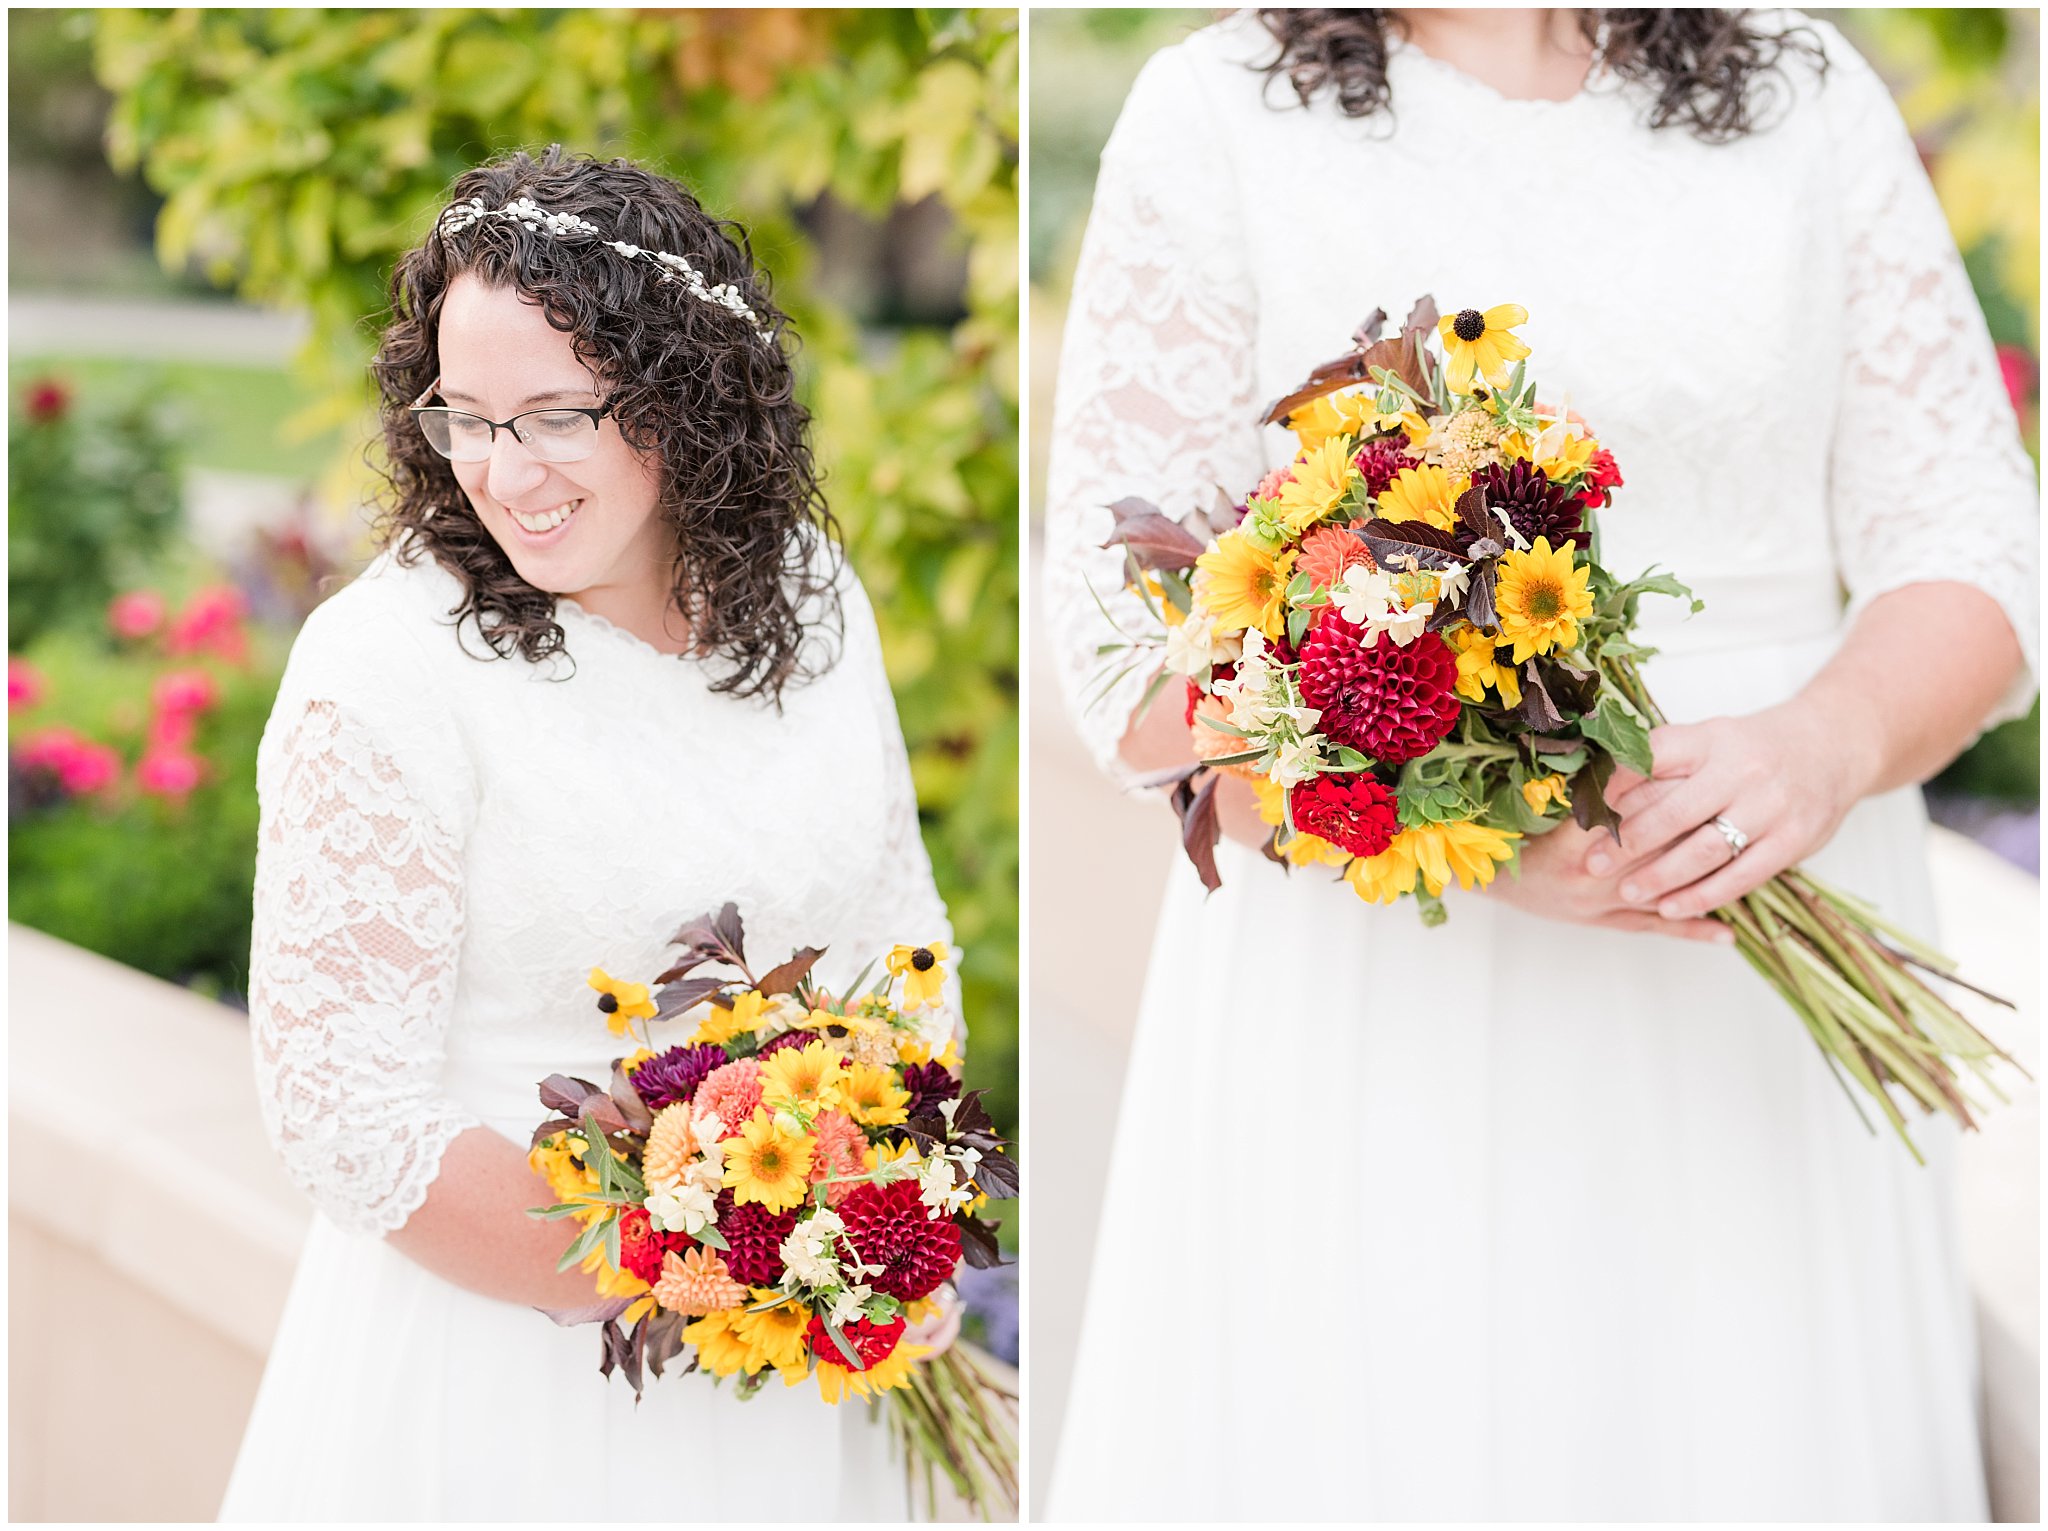 GroomBride in simple lace sleeve wedding dress with fall bouquet | Logan Temple Fall Formal Session | Jessie and Dallin Photography